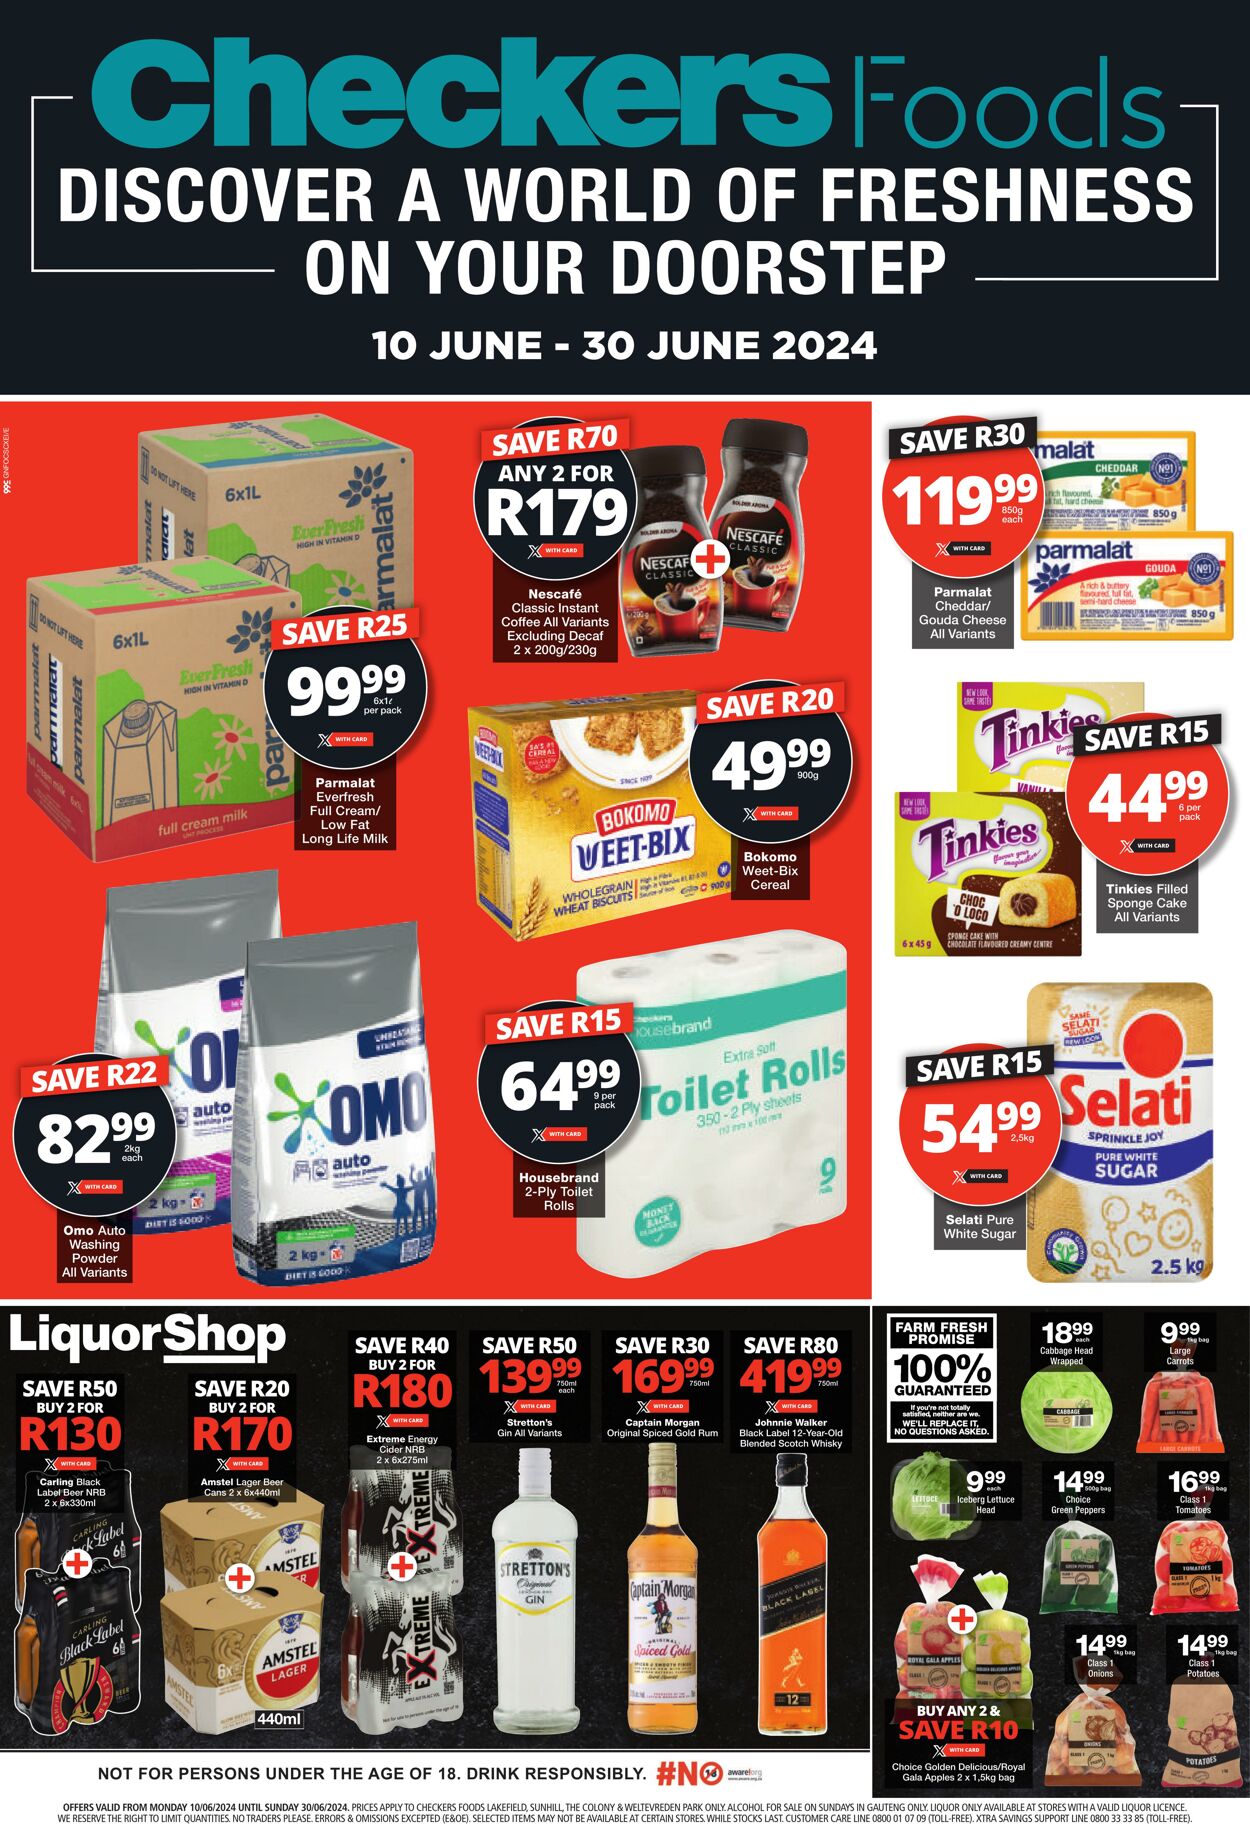 Special Checkers - Checkers Foods June Mid-Month Promotion | 10 June - 30 June 2024 10 Jun, 2024 - 30 Jun, 2024